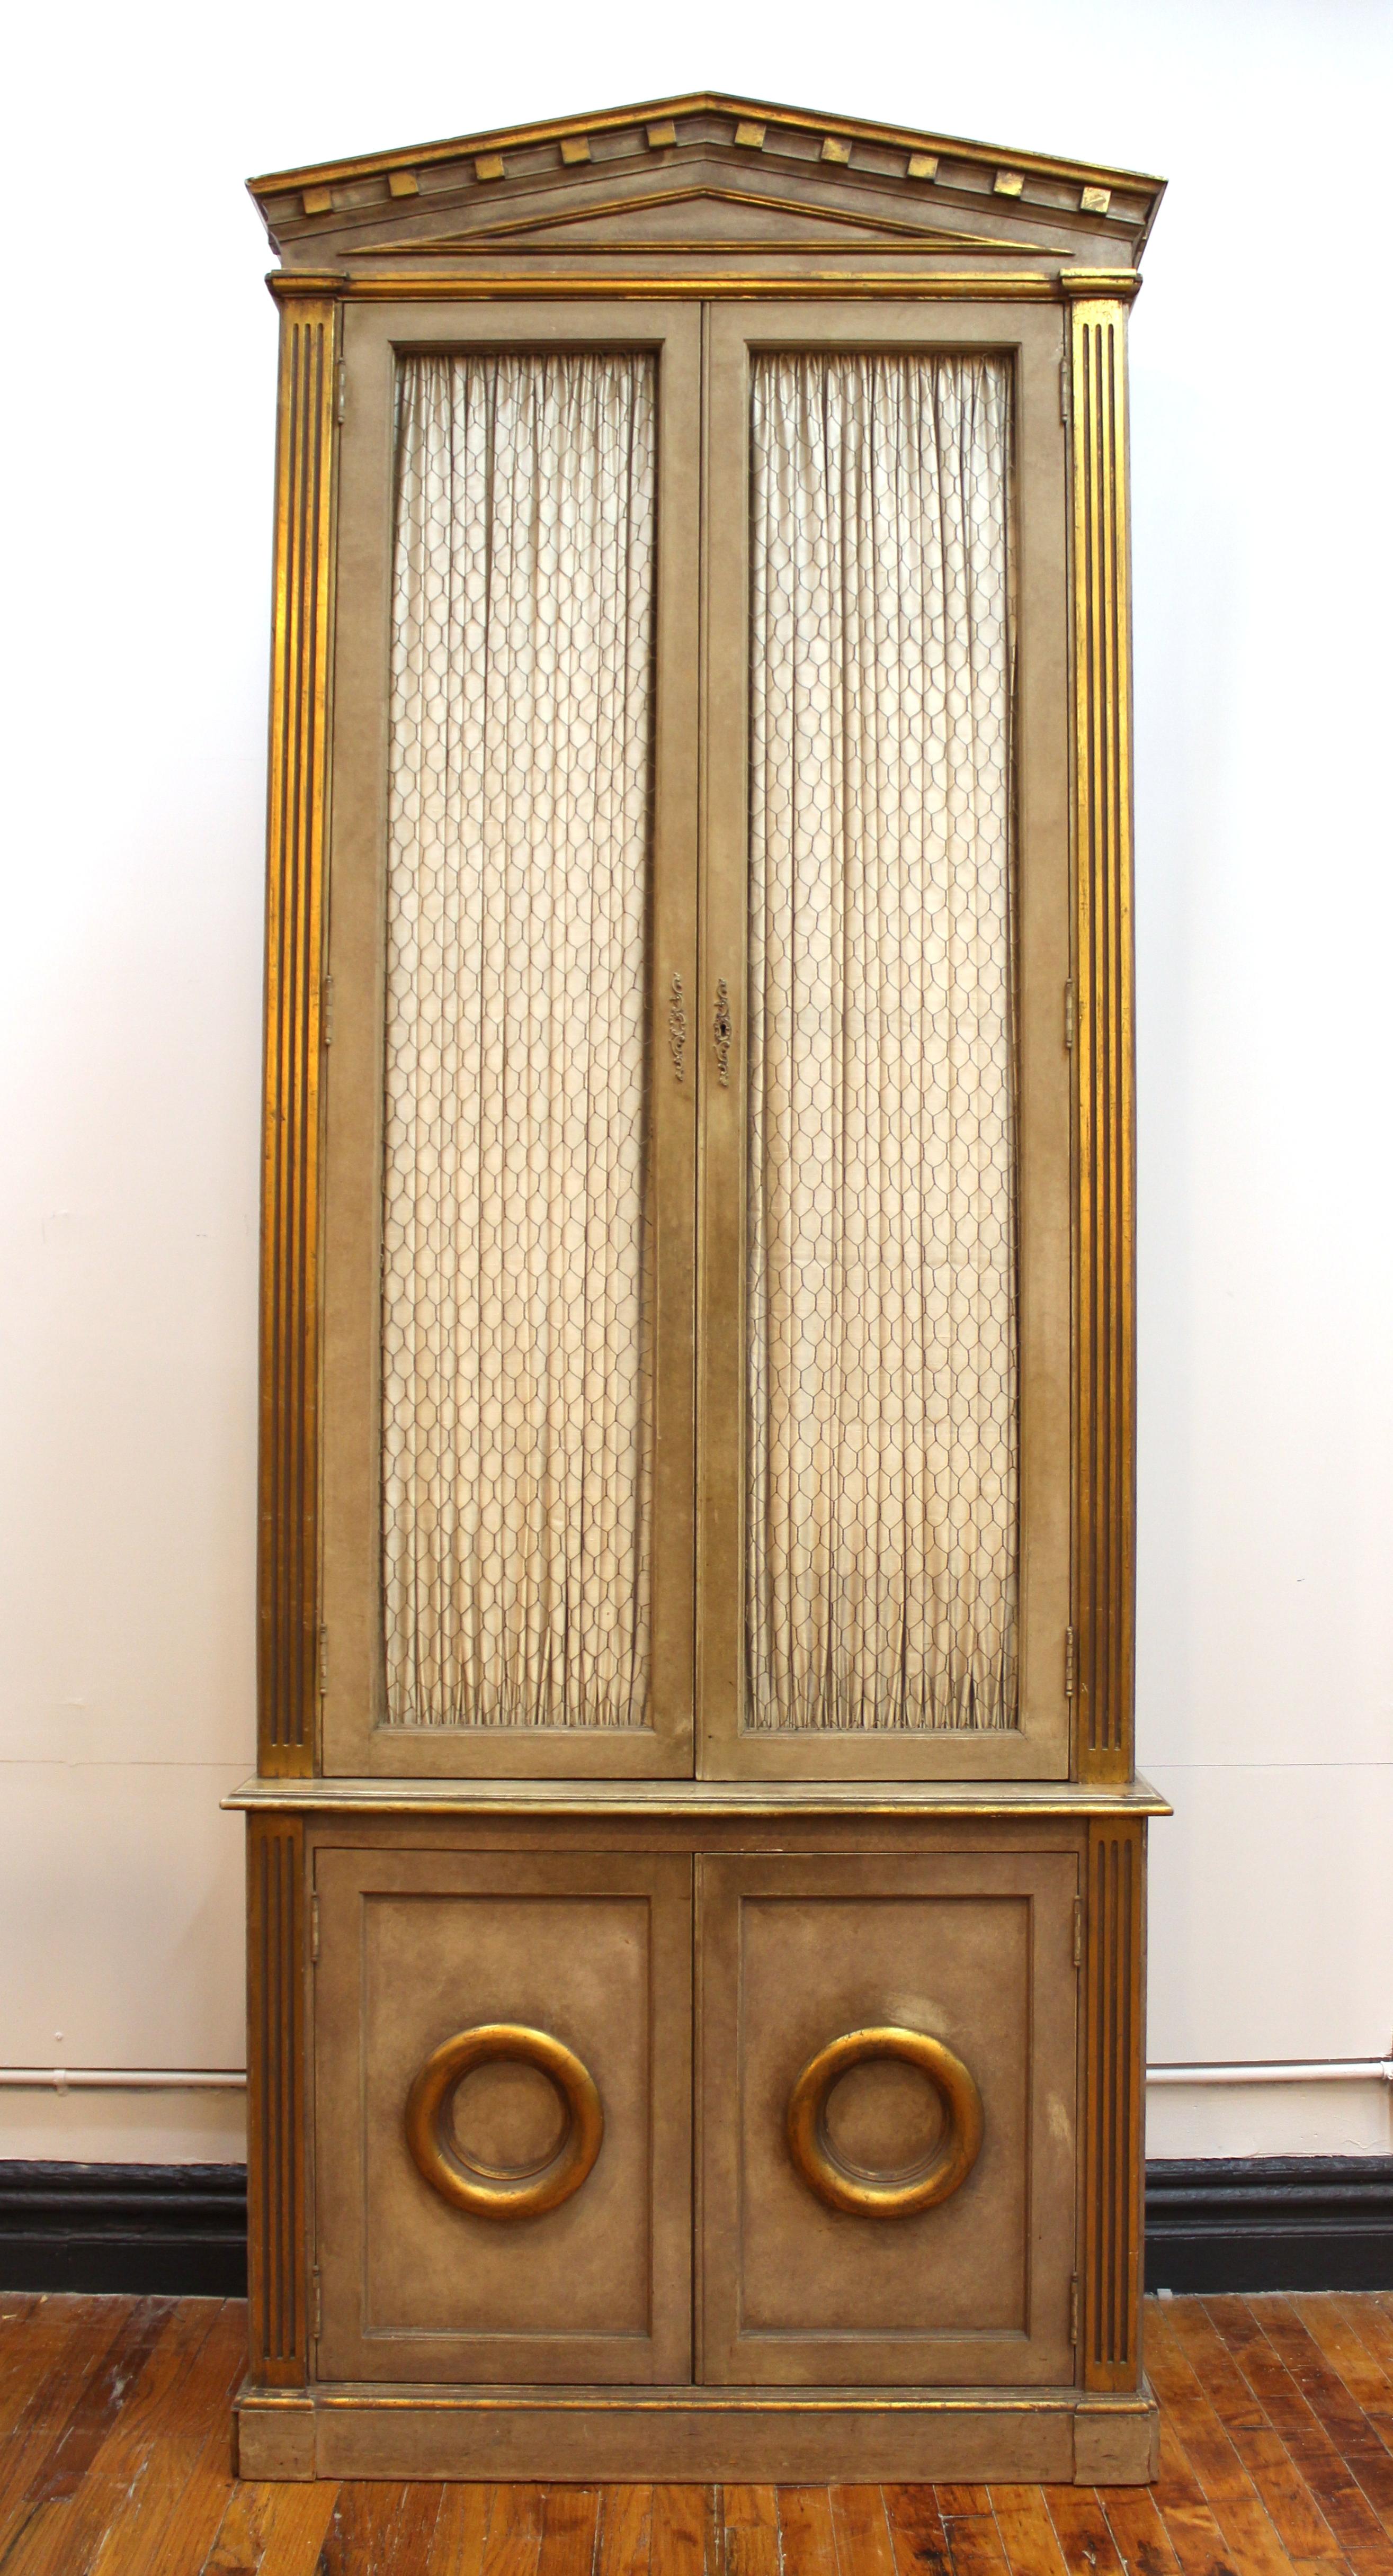 Monumental pair of wood cabinets in Neoclassical Revival style with pedimented tops. The pair has gilt accents and the upper parts can be separated easily from the lower cabinets. The doors of the upper section have wire in the opening and textile